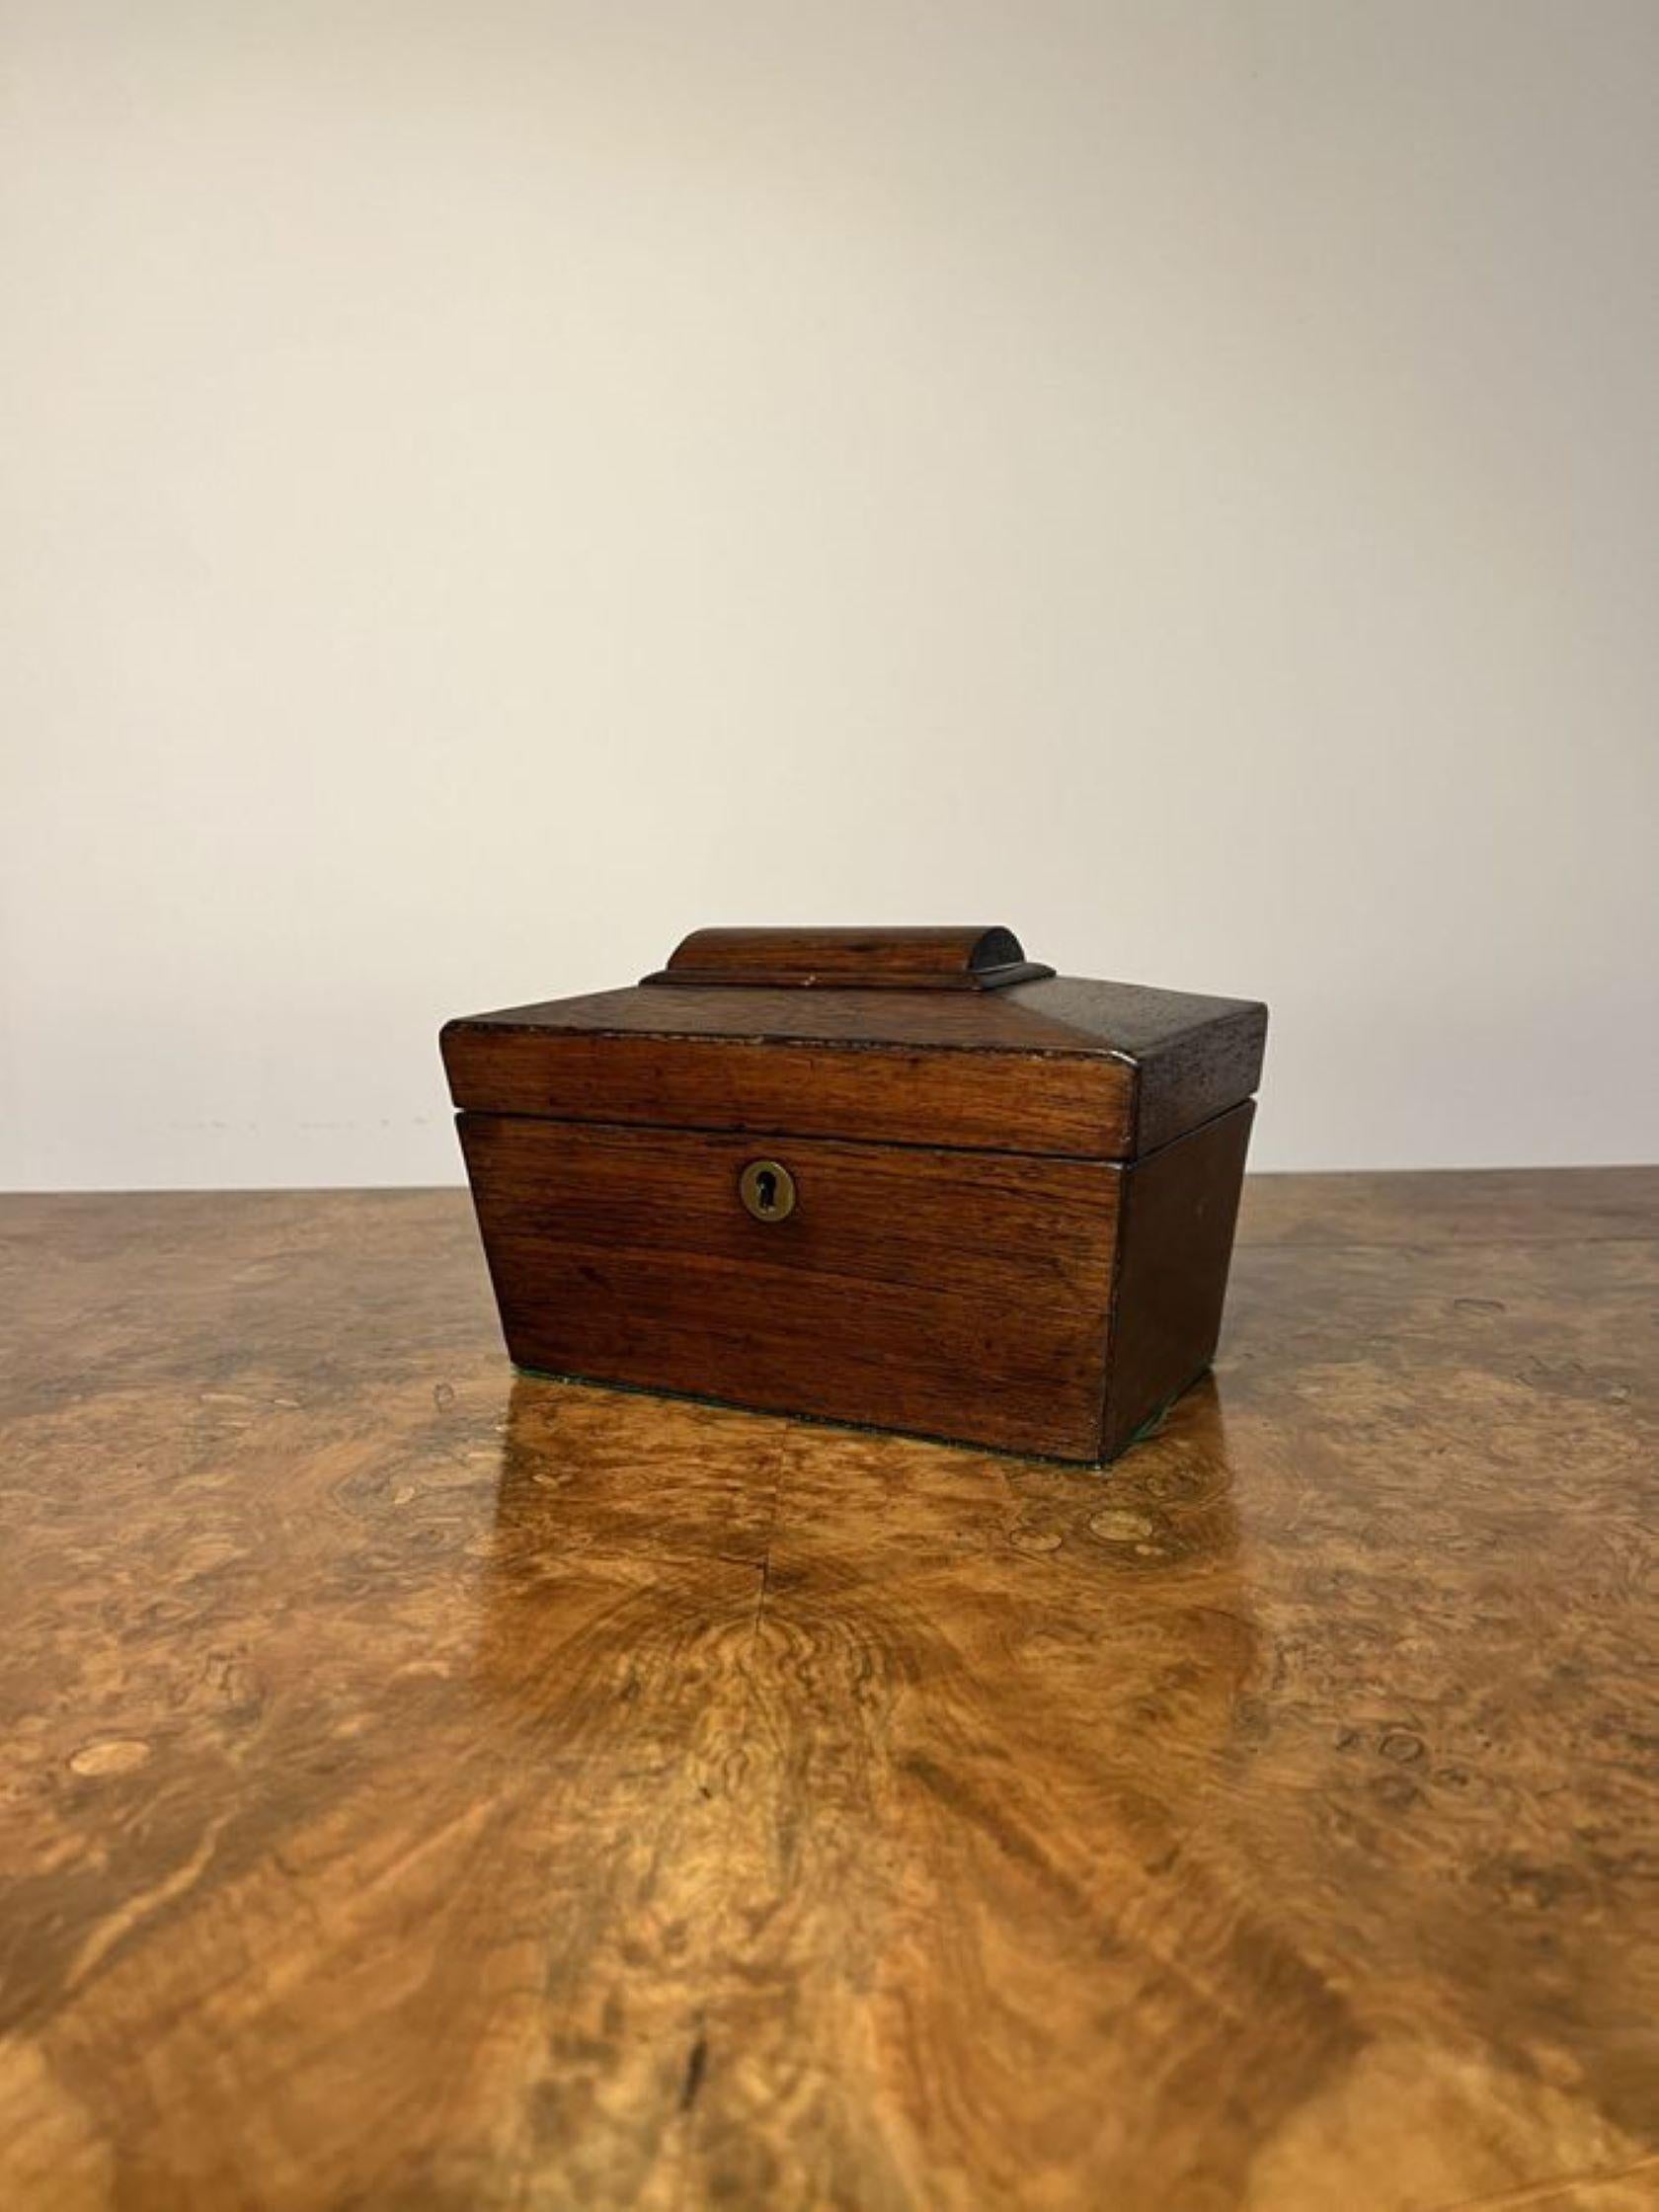 Lovely antique Victorian rosewood storage box, having a quality rosewood box of Sarcophagus shape, with a lift up lid opening to reveal a storage compartment with red interior.

D. 1850